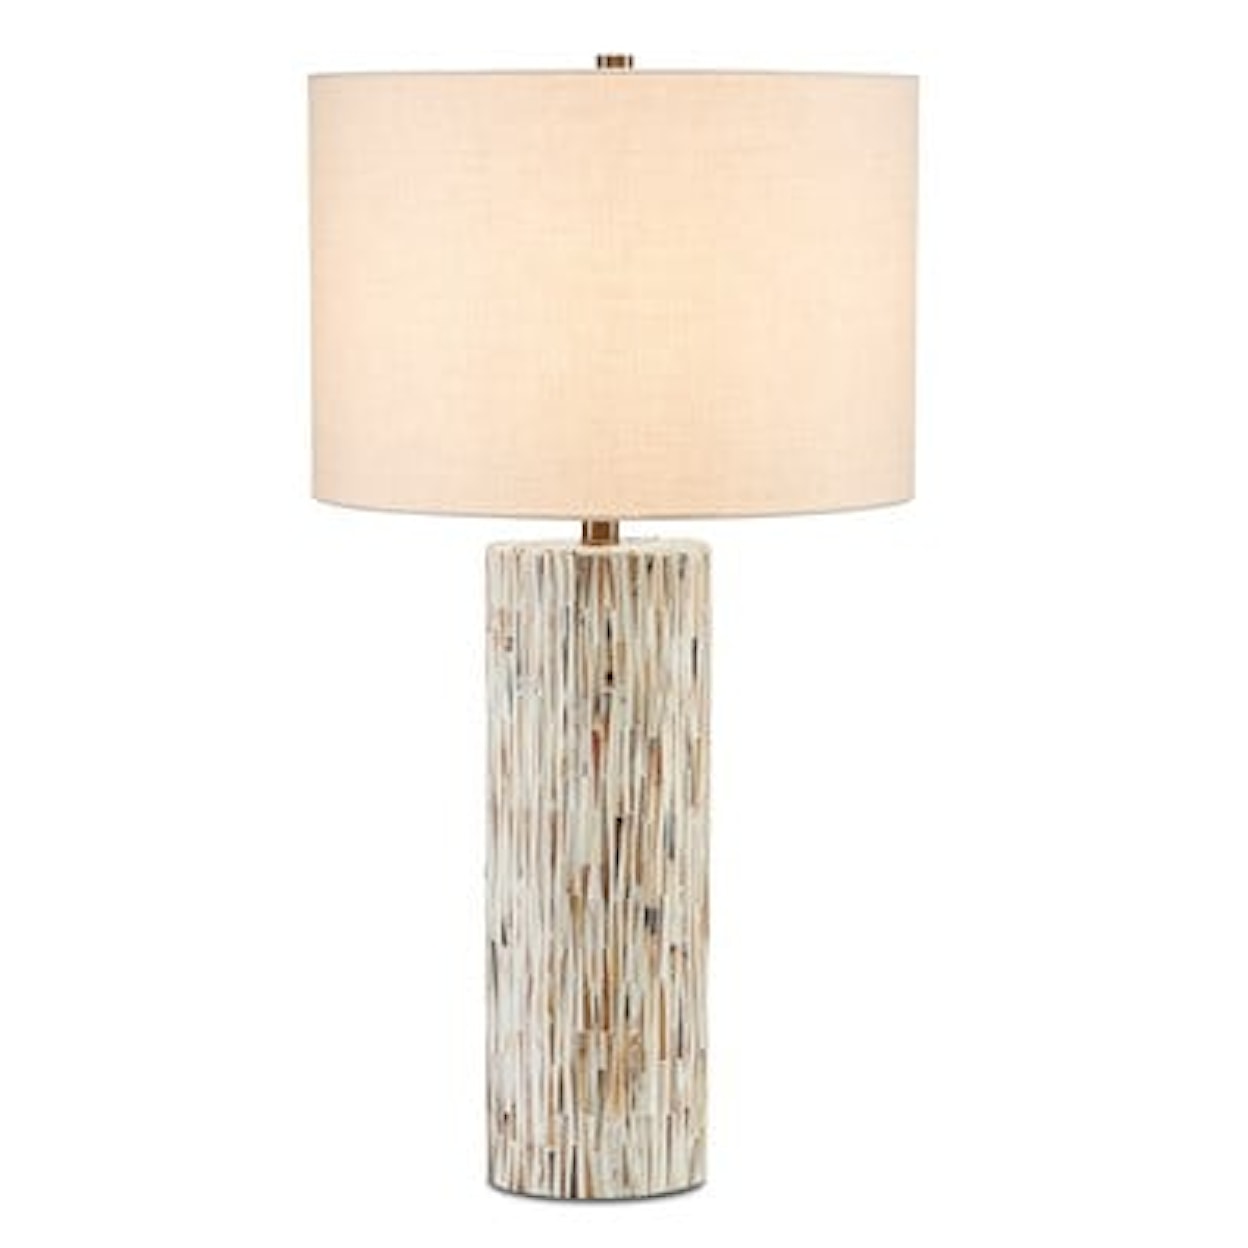 Currey & Co Lighting Table Lamps AQUILA TABLE LAMP